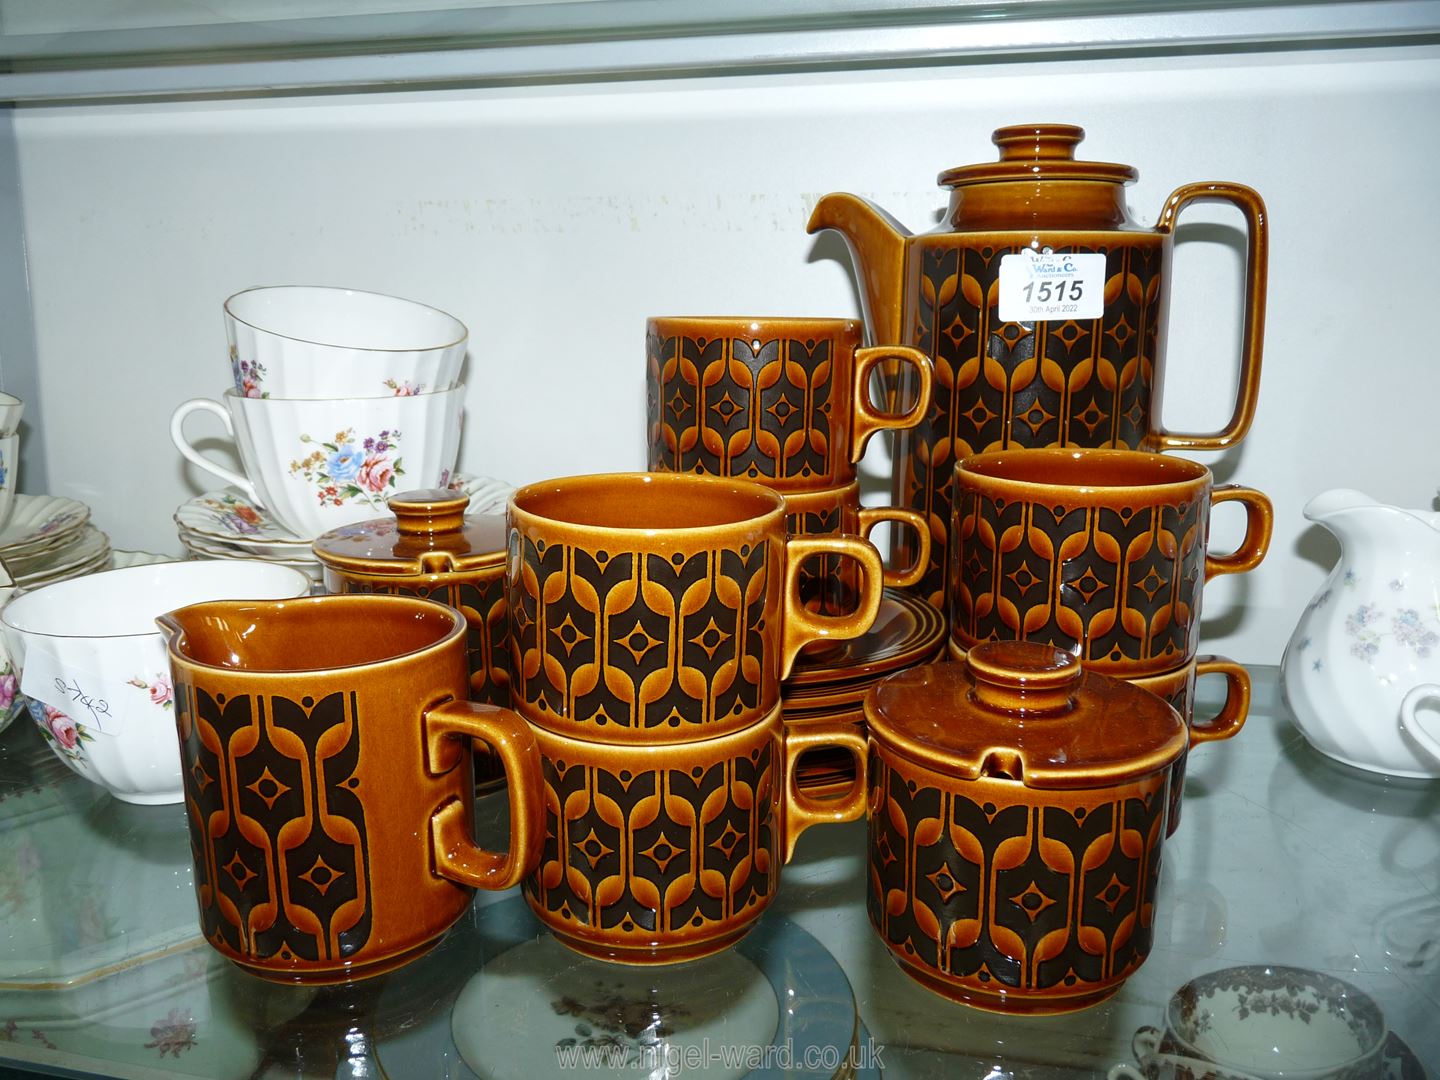 A Hornsea 'Heirloom' coffee service for six.